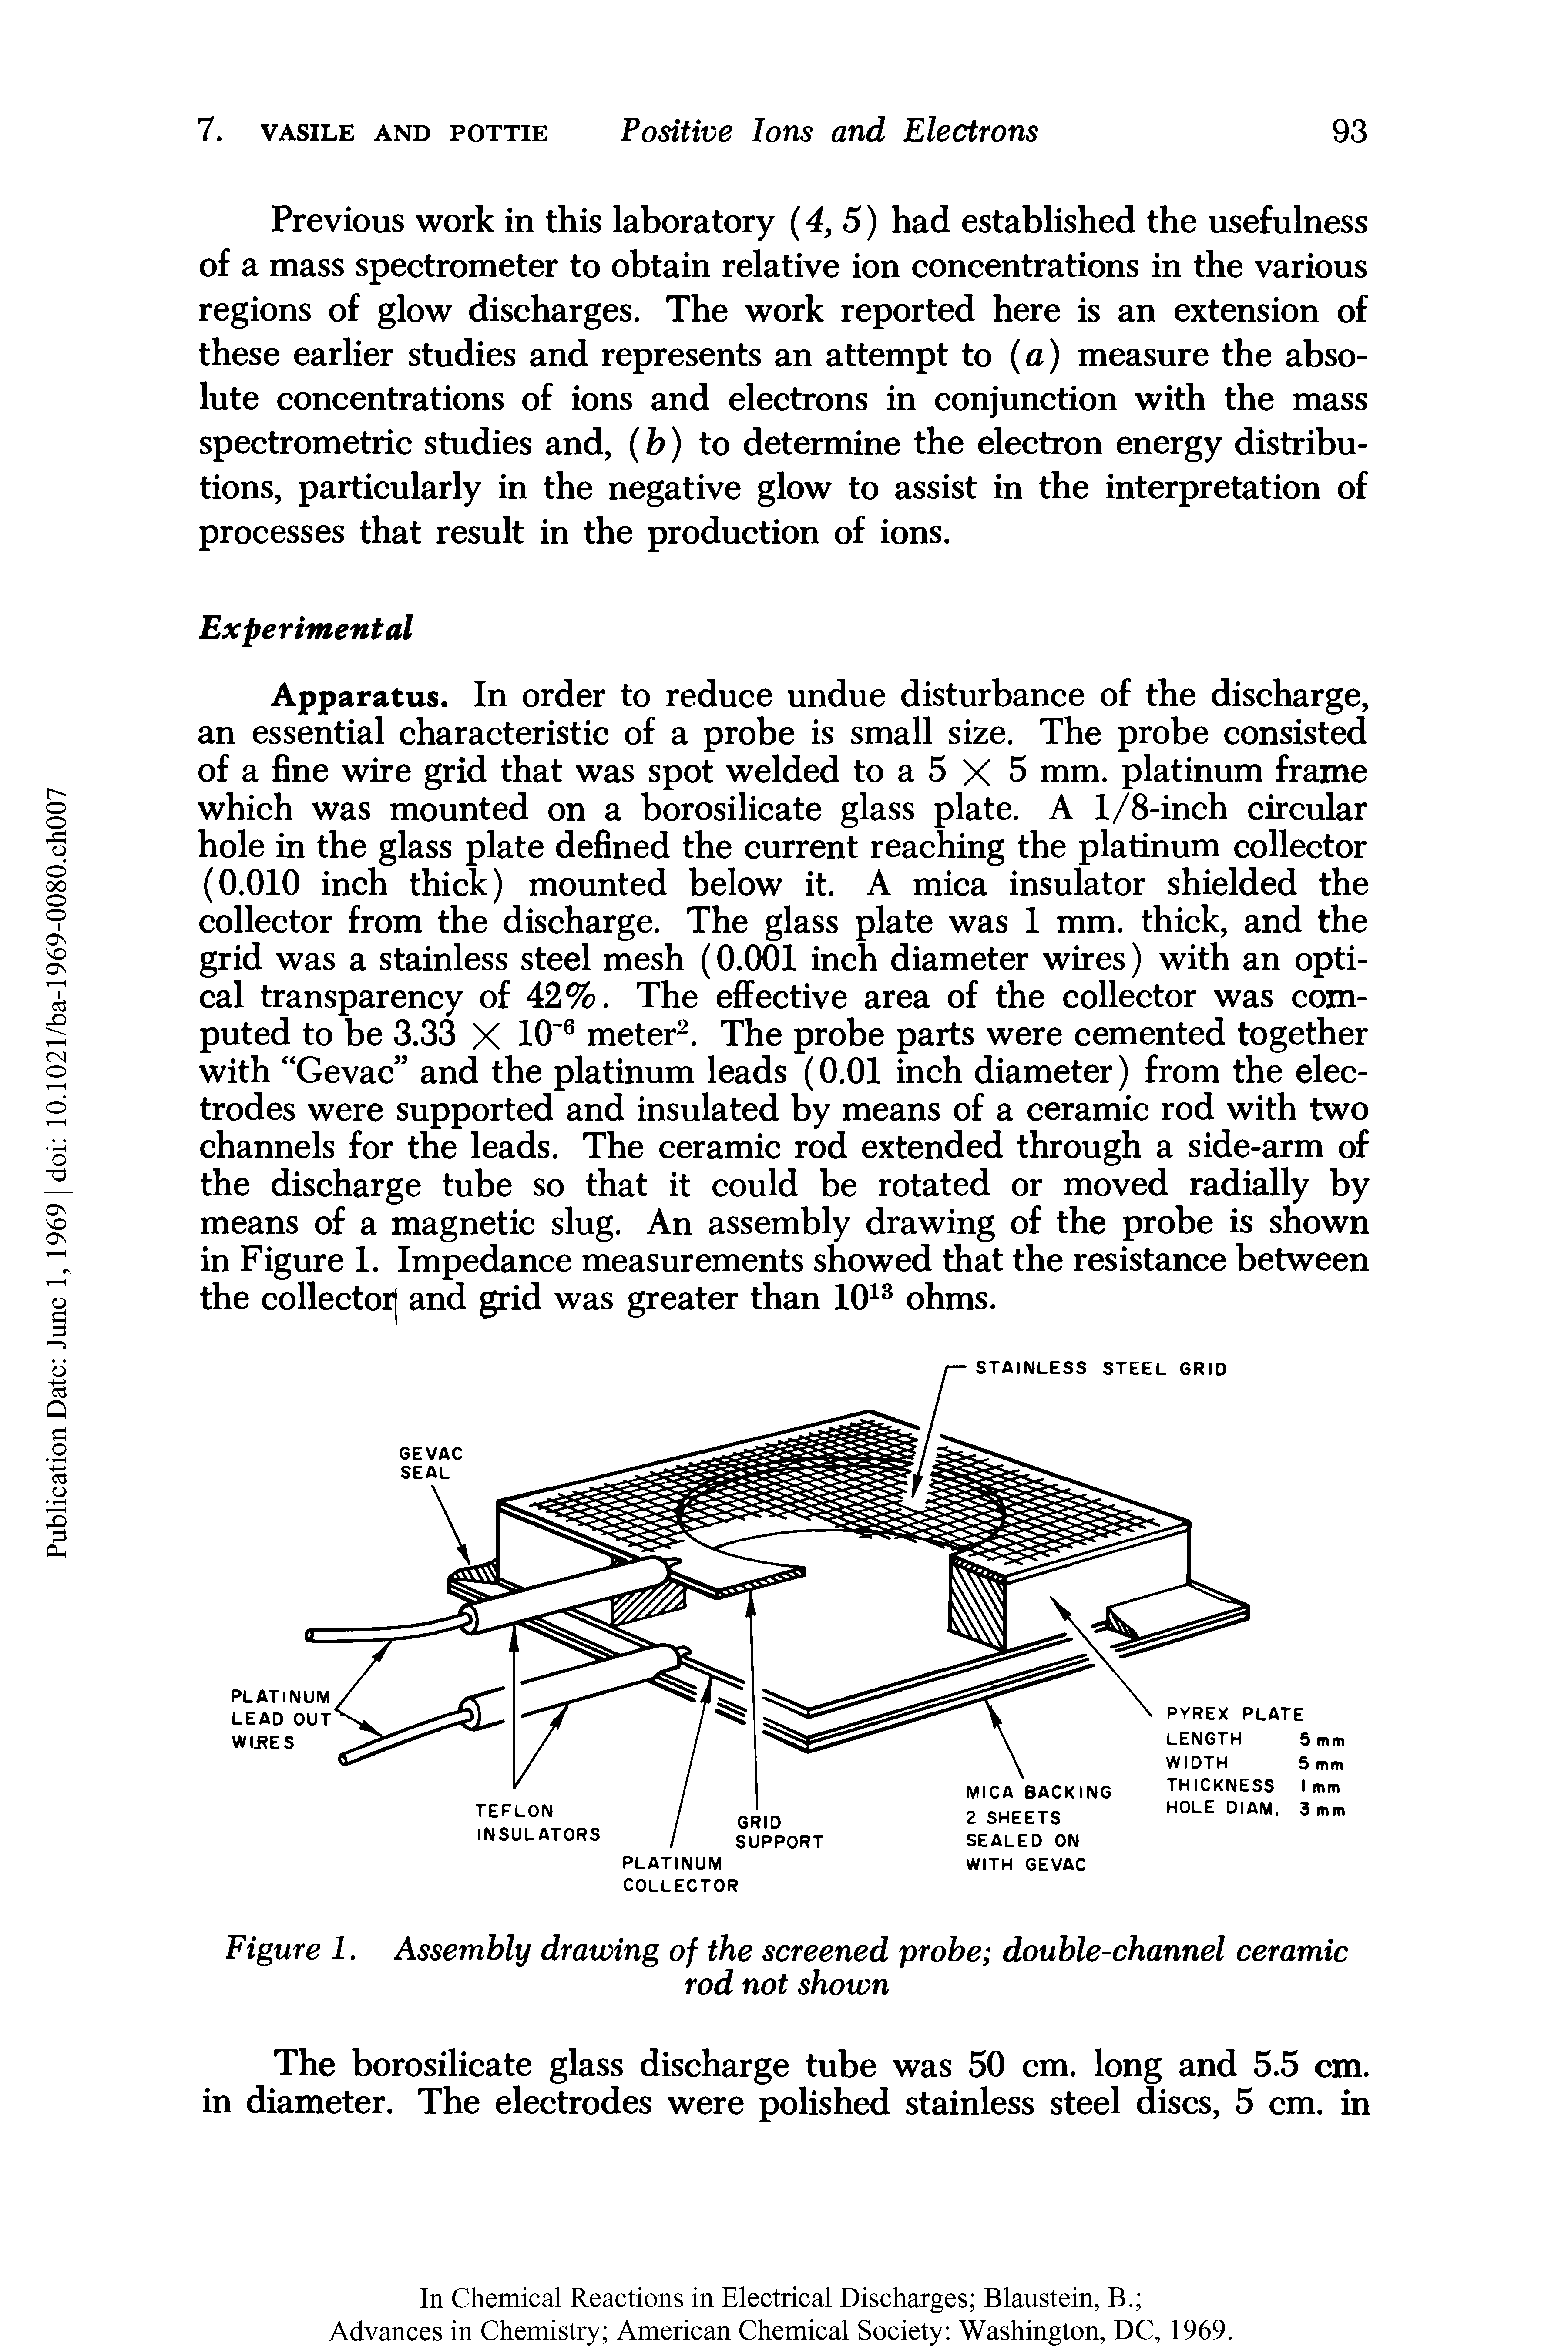 Figure 1. Assembly drawing of the screened probe double-channel ceramic...